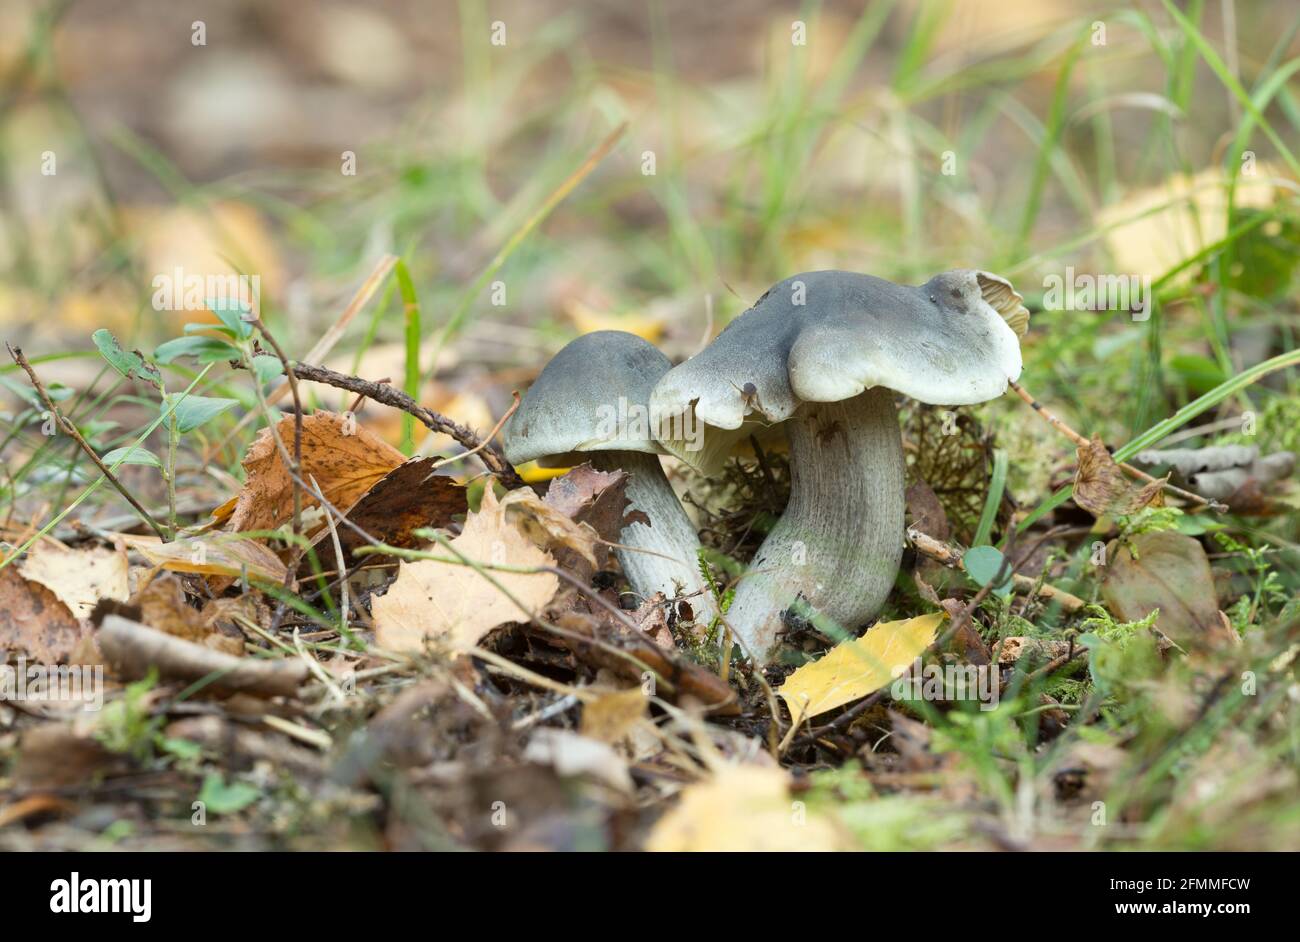 Soap-scented toadstool growing among leafs Stock Photo